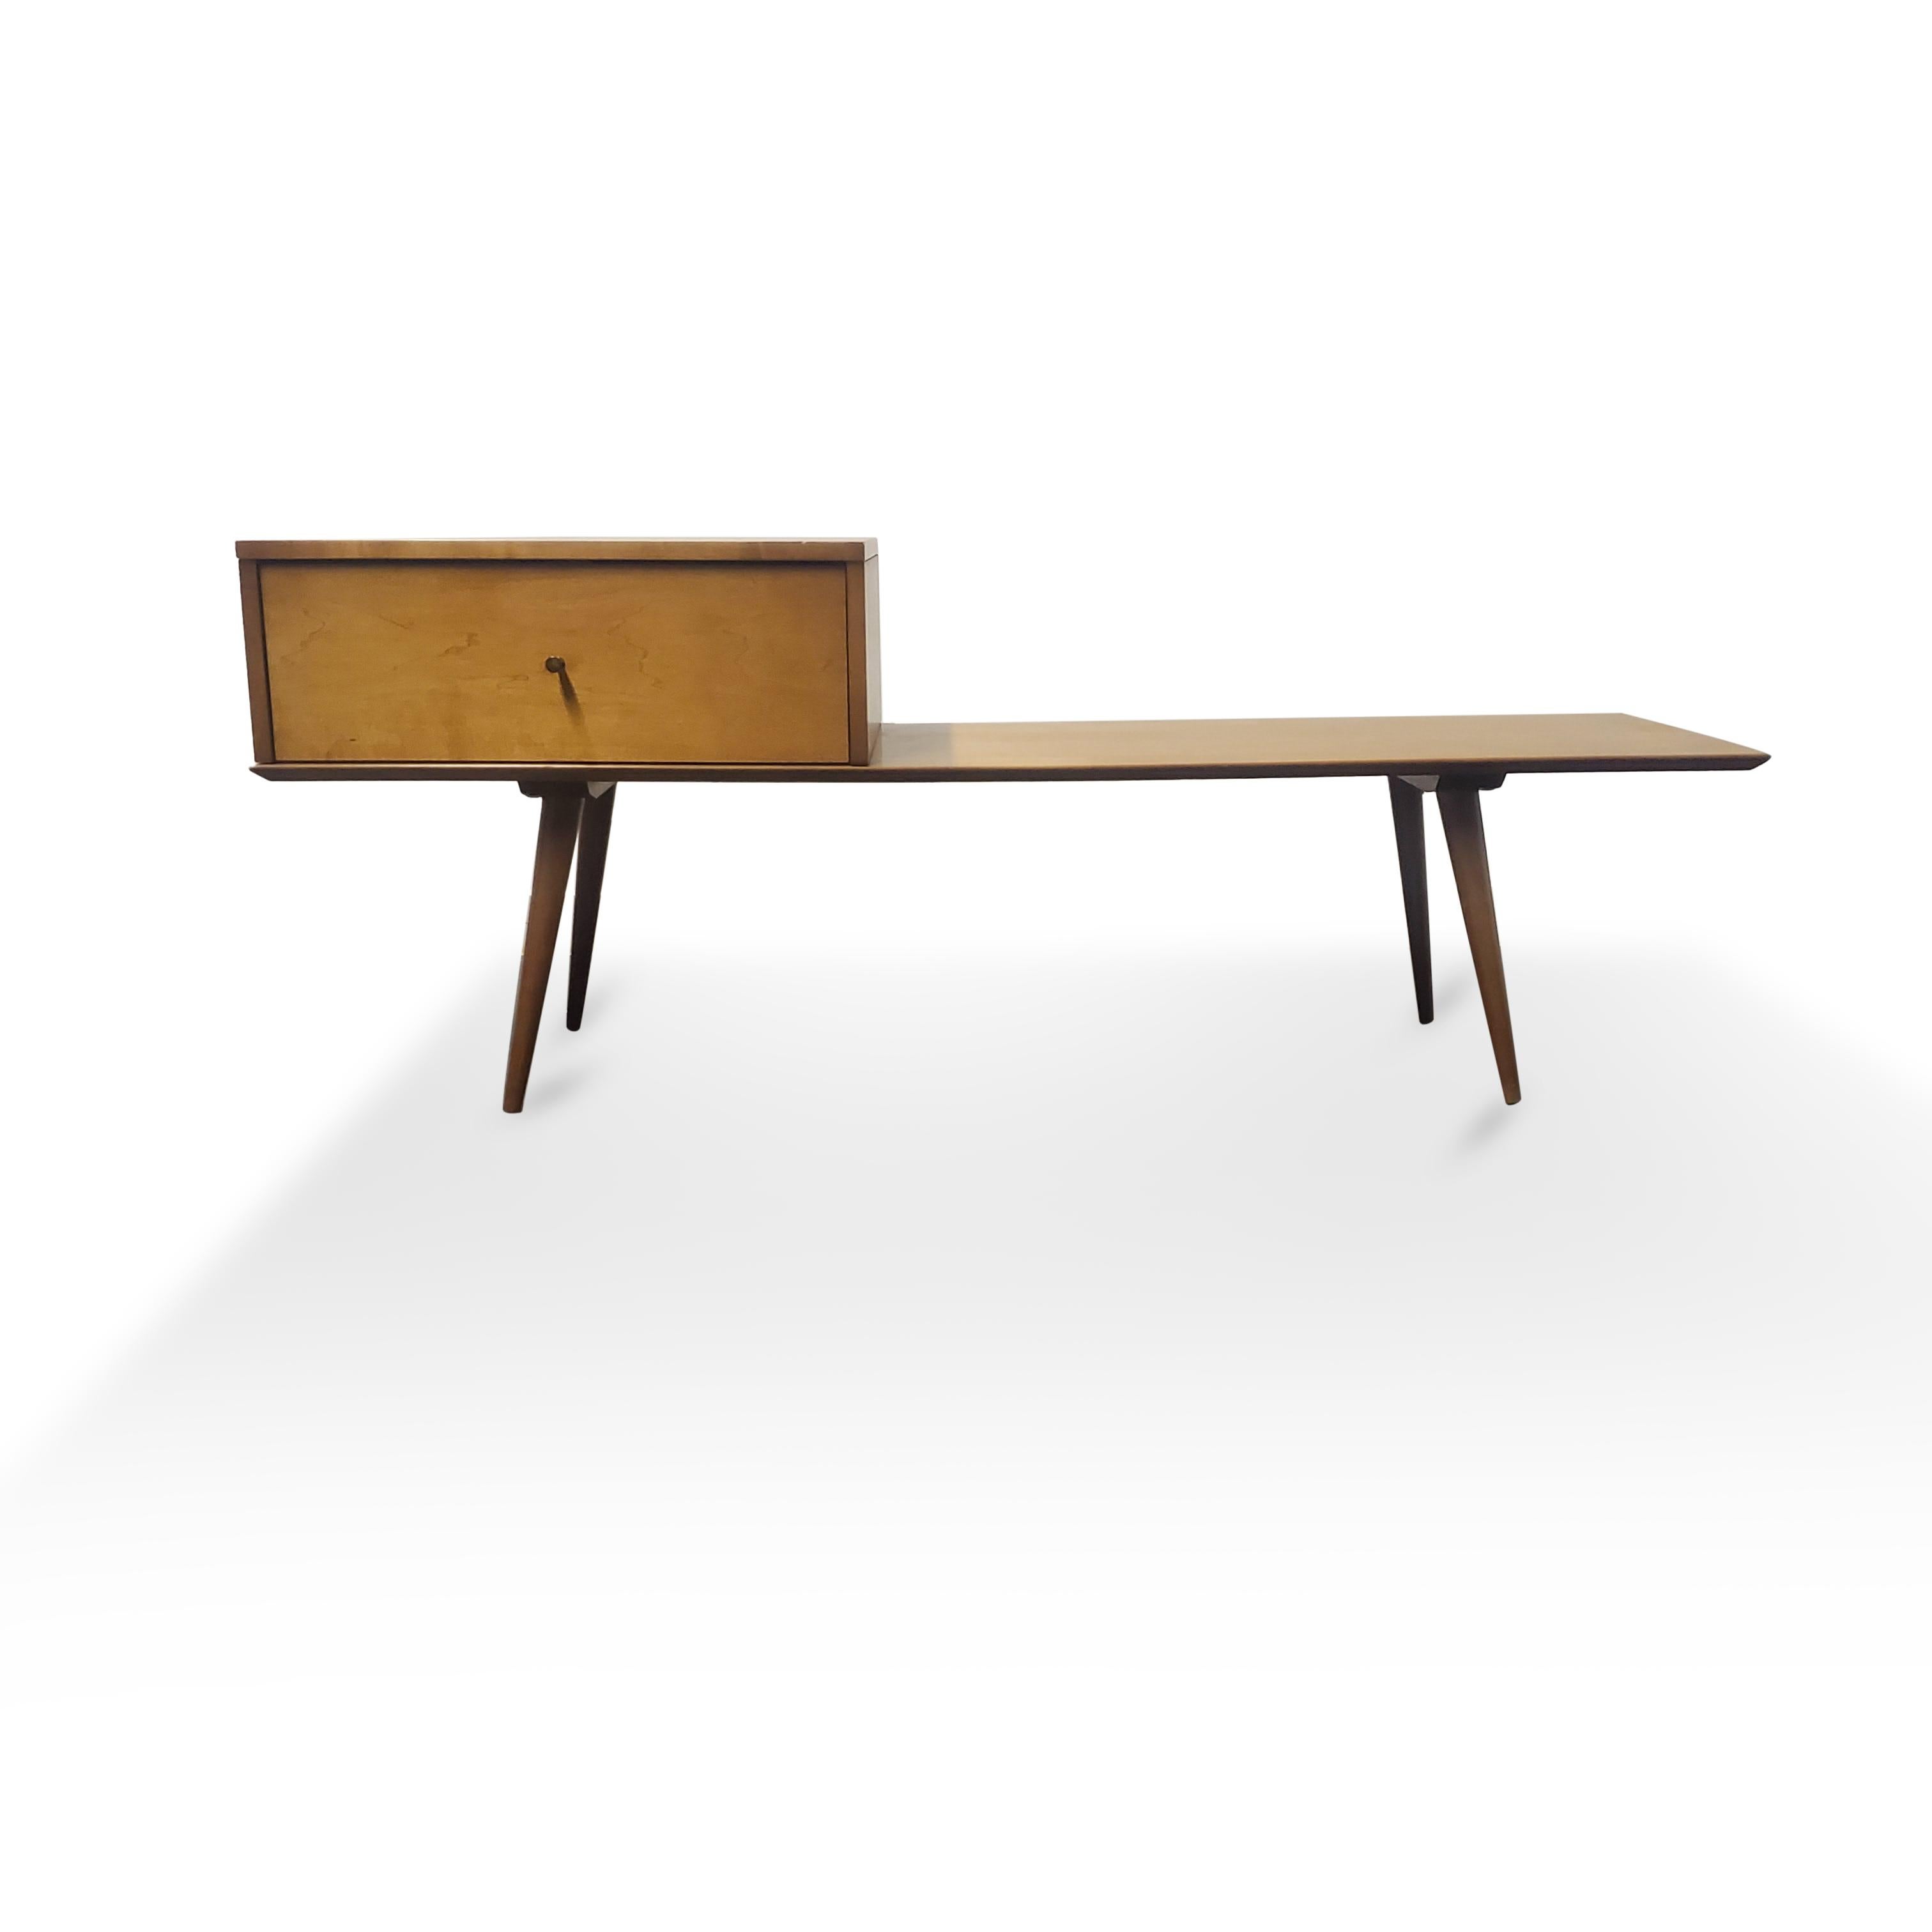 Paul McCobb bench with cabinet for planner group 



Measures: 14.5